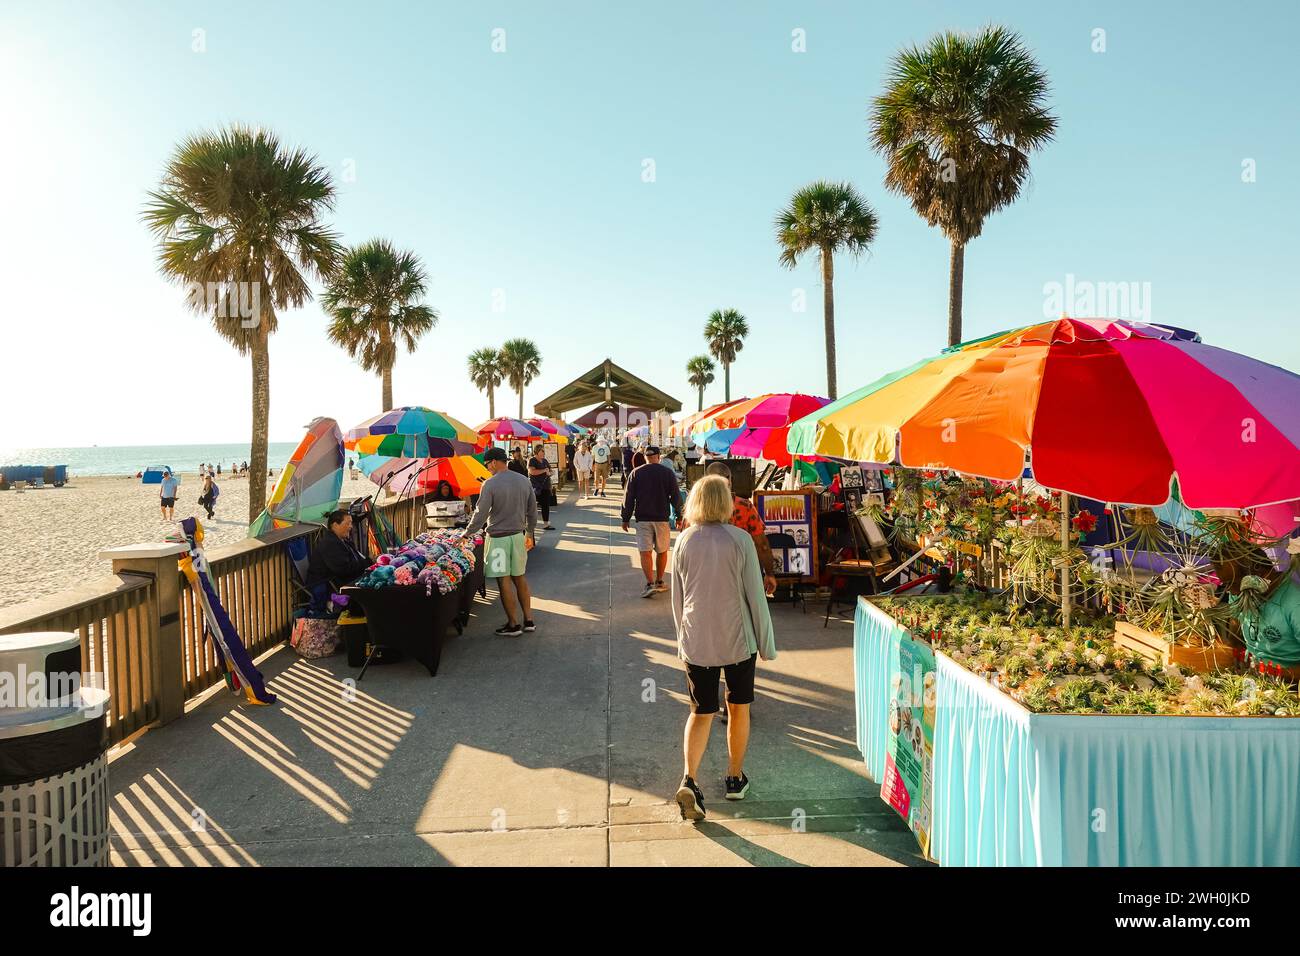 Vibrant outdoor market near a beach in Florida, with stalls, vendors, on a sunny day under clear skies Stock Photo